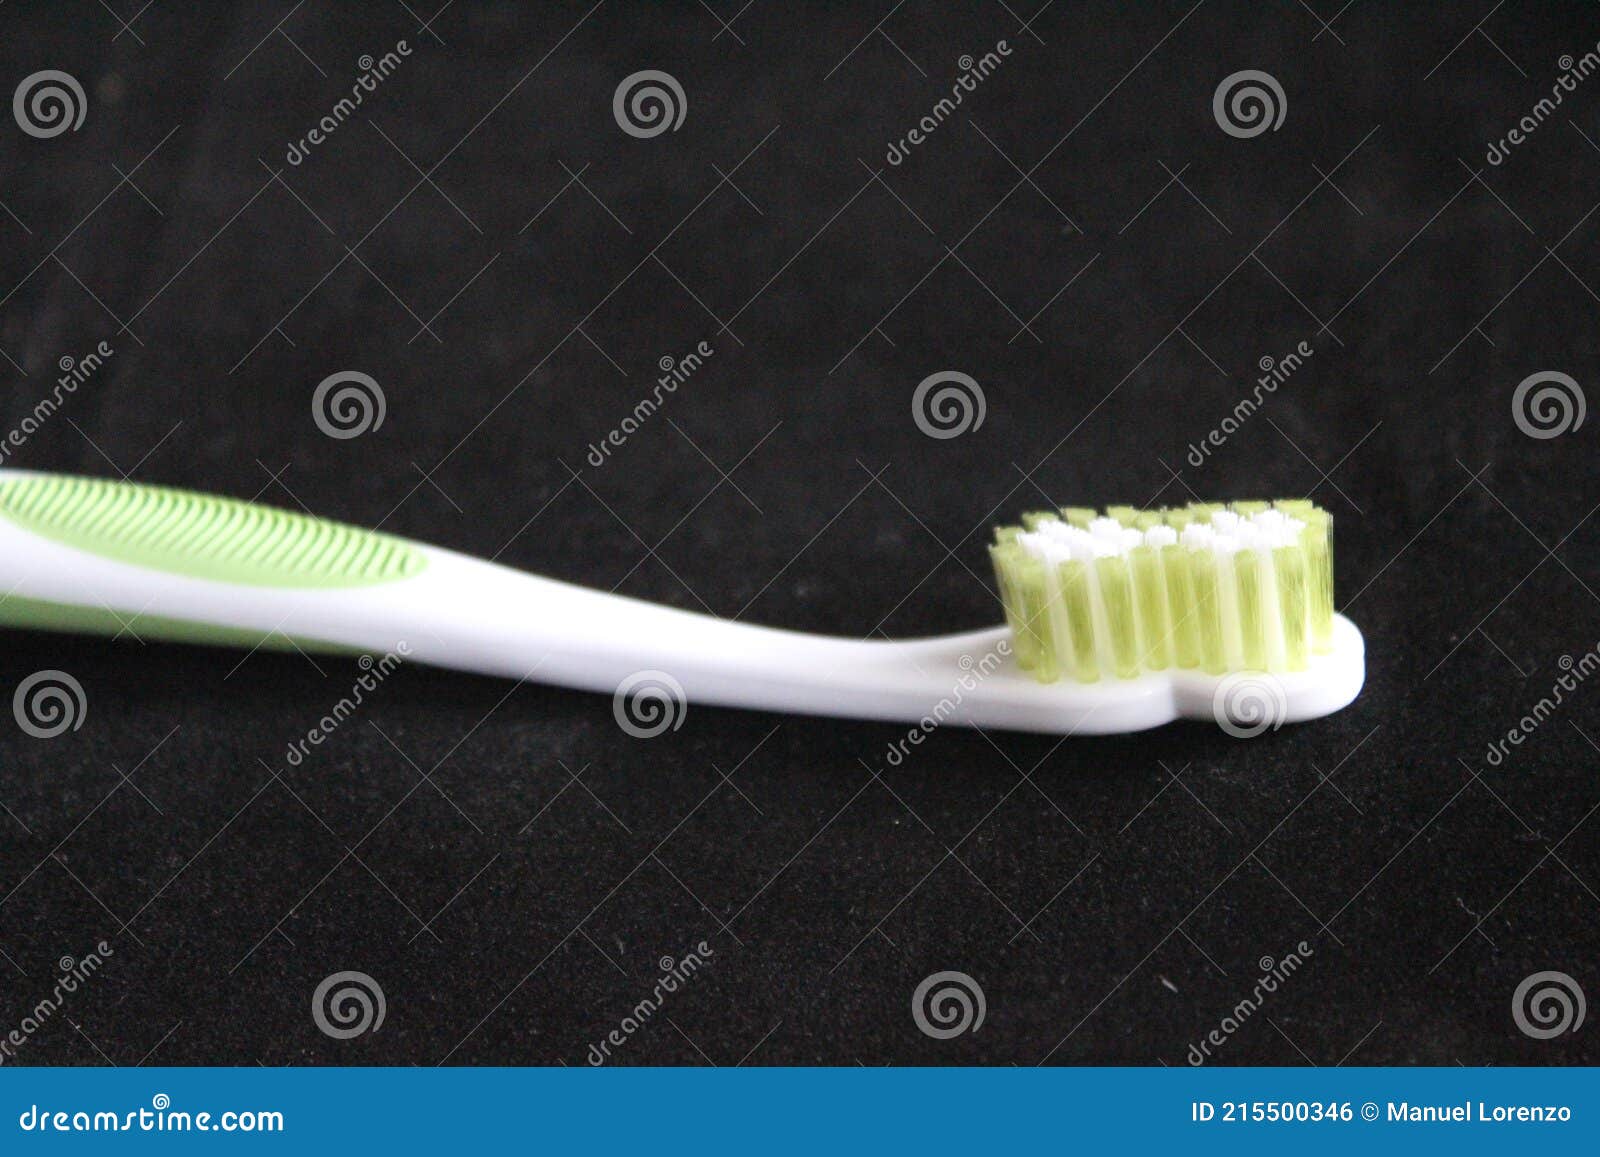 mouth brush teeth toothpaste cleaning hygiene care